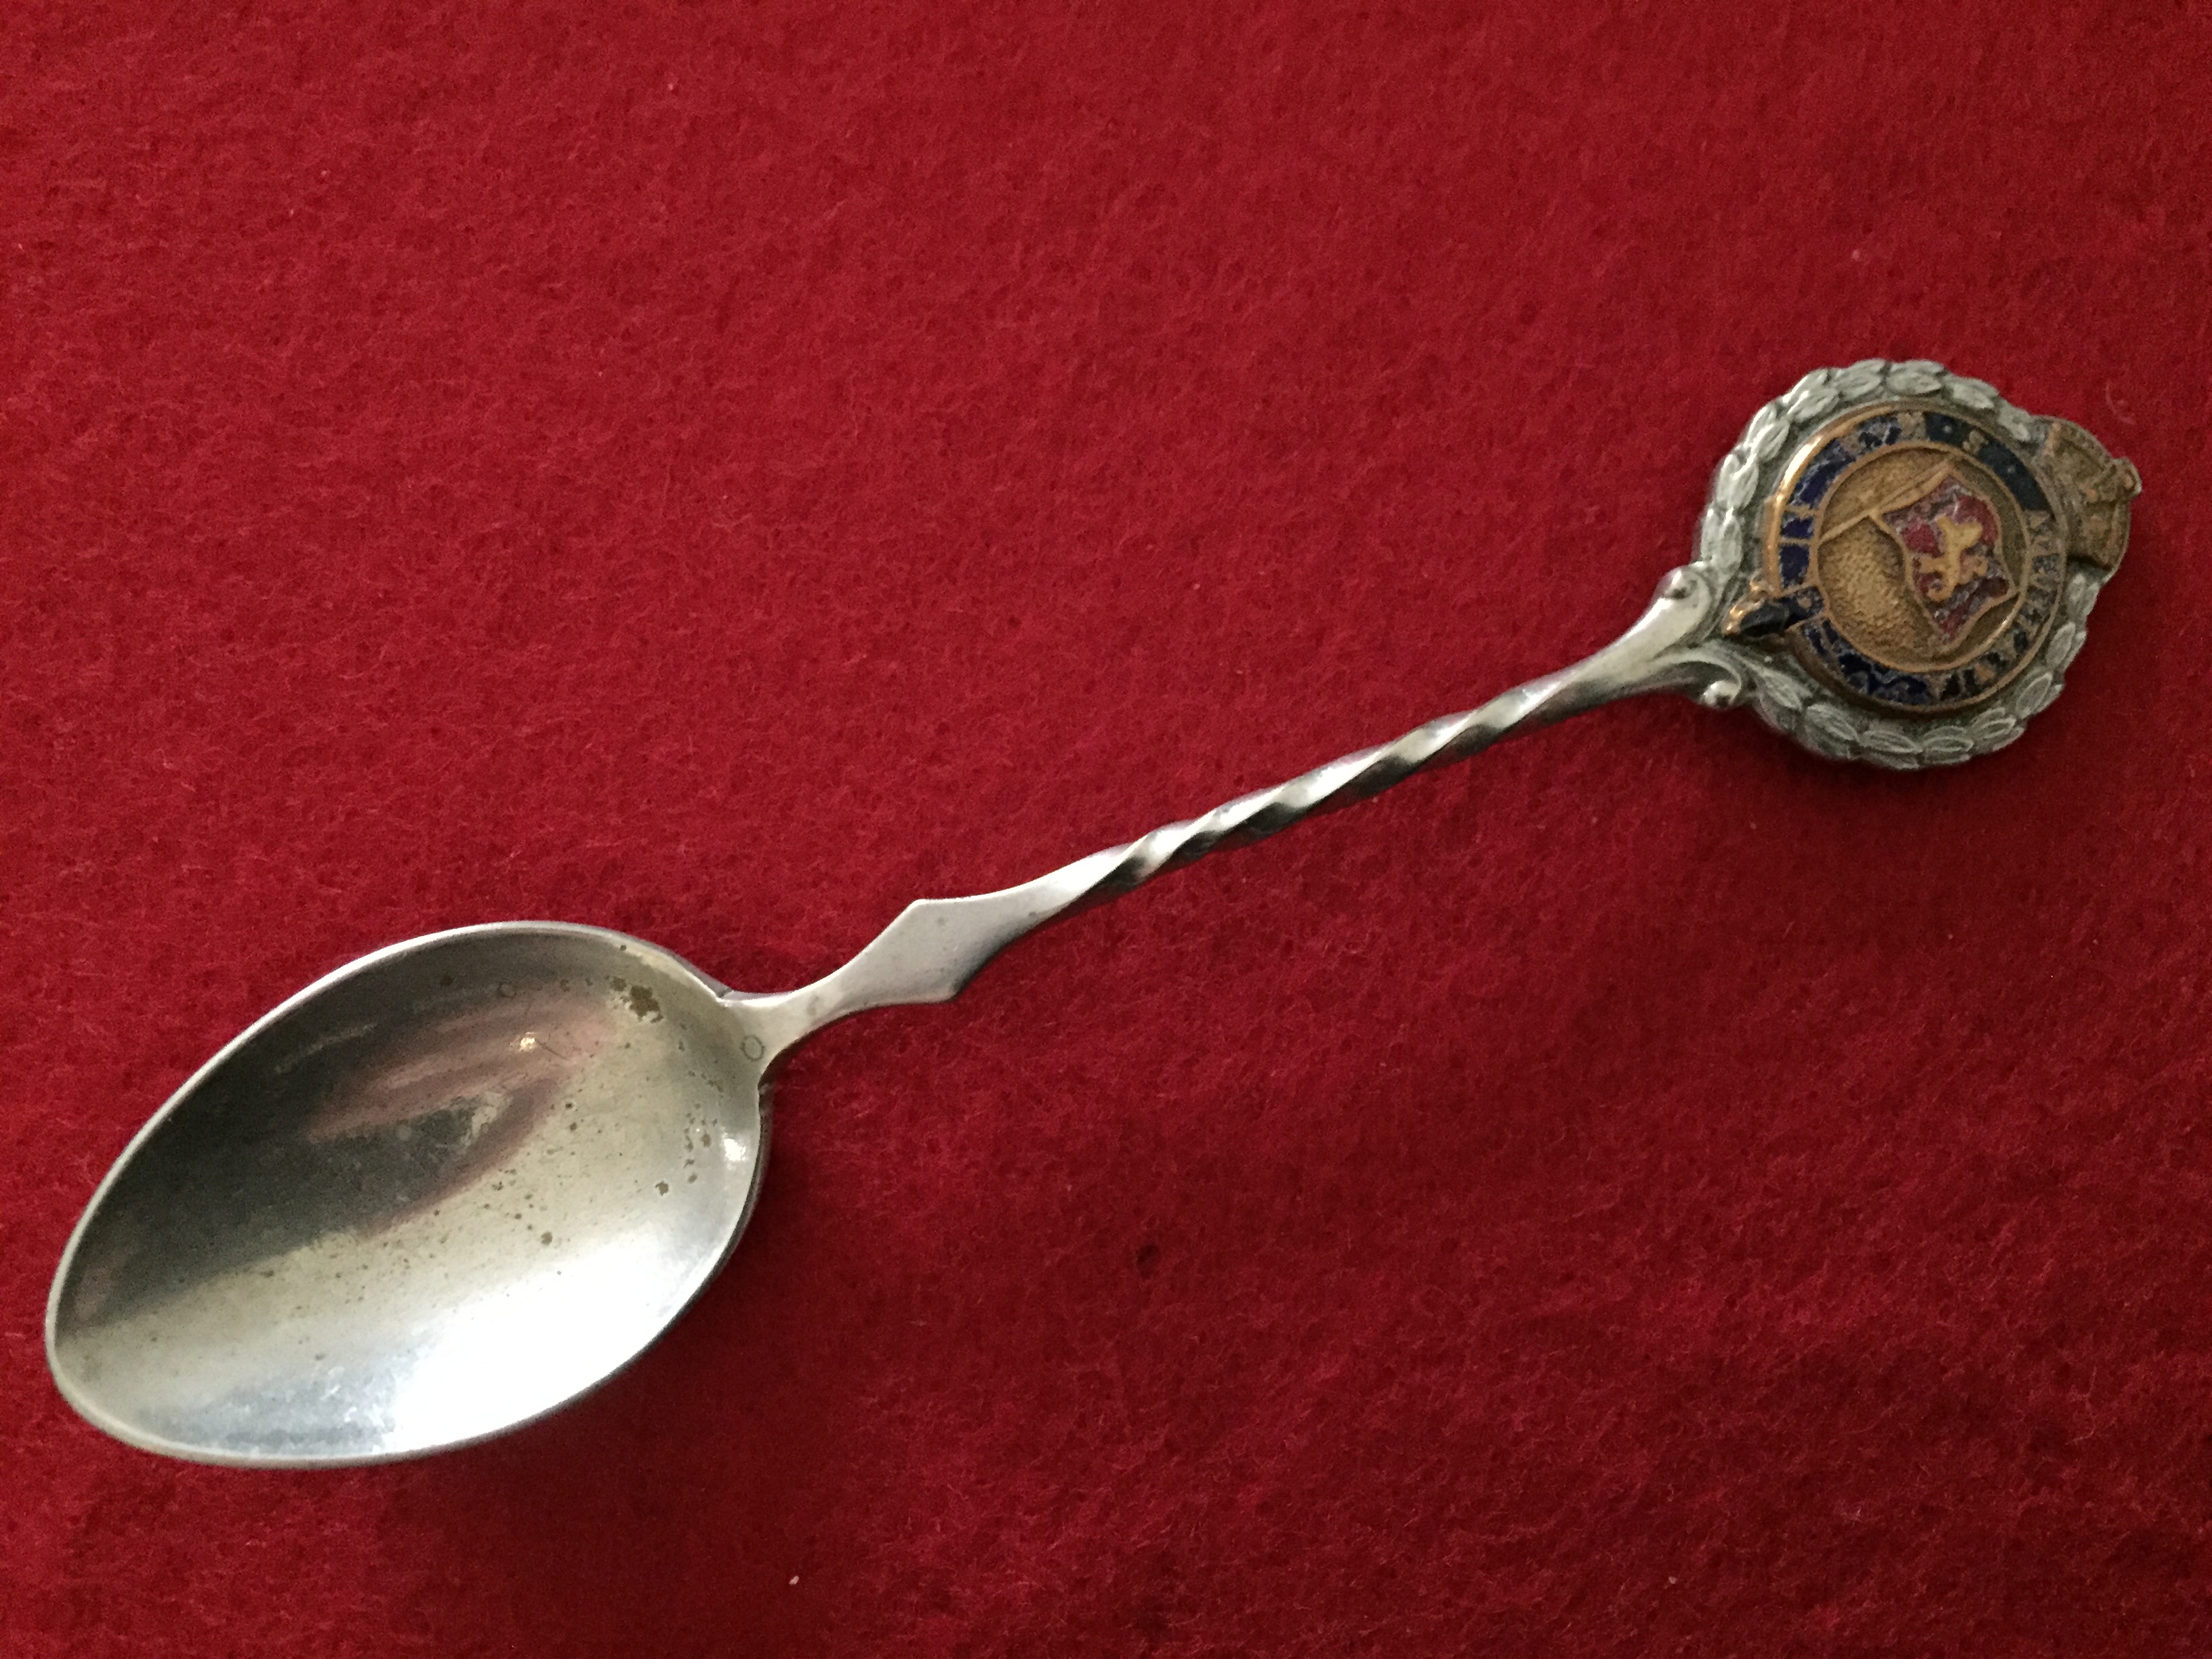 SOUVENIR SPOON FROM THE FAMOUS OLD VESSEL THE AQUITANIA